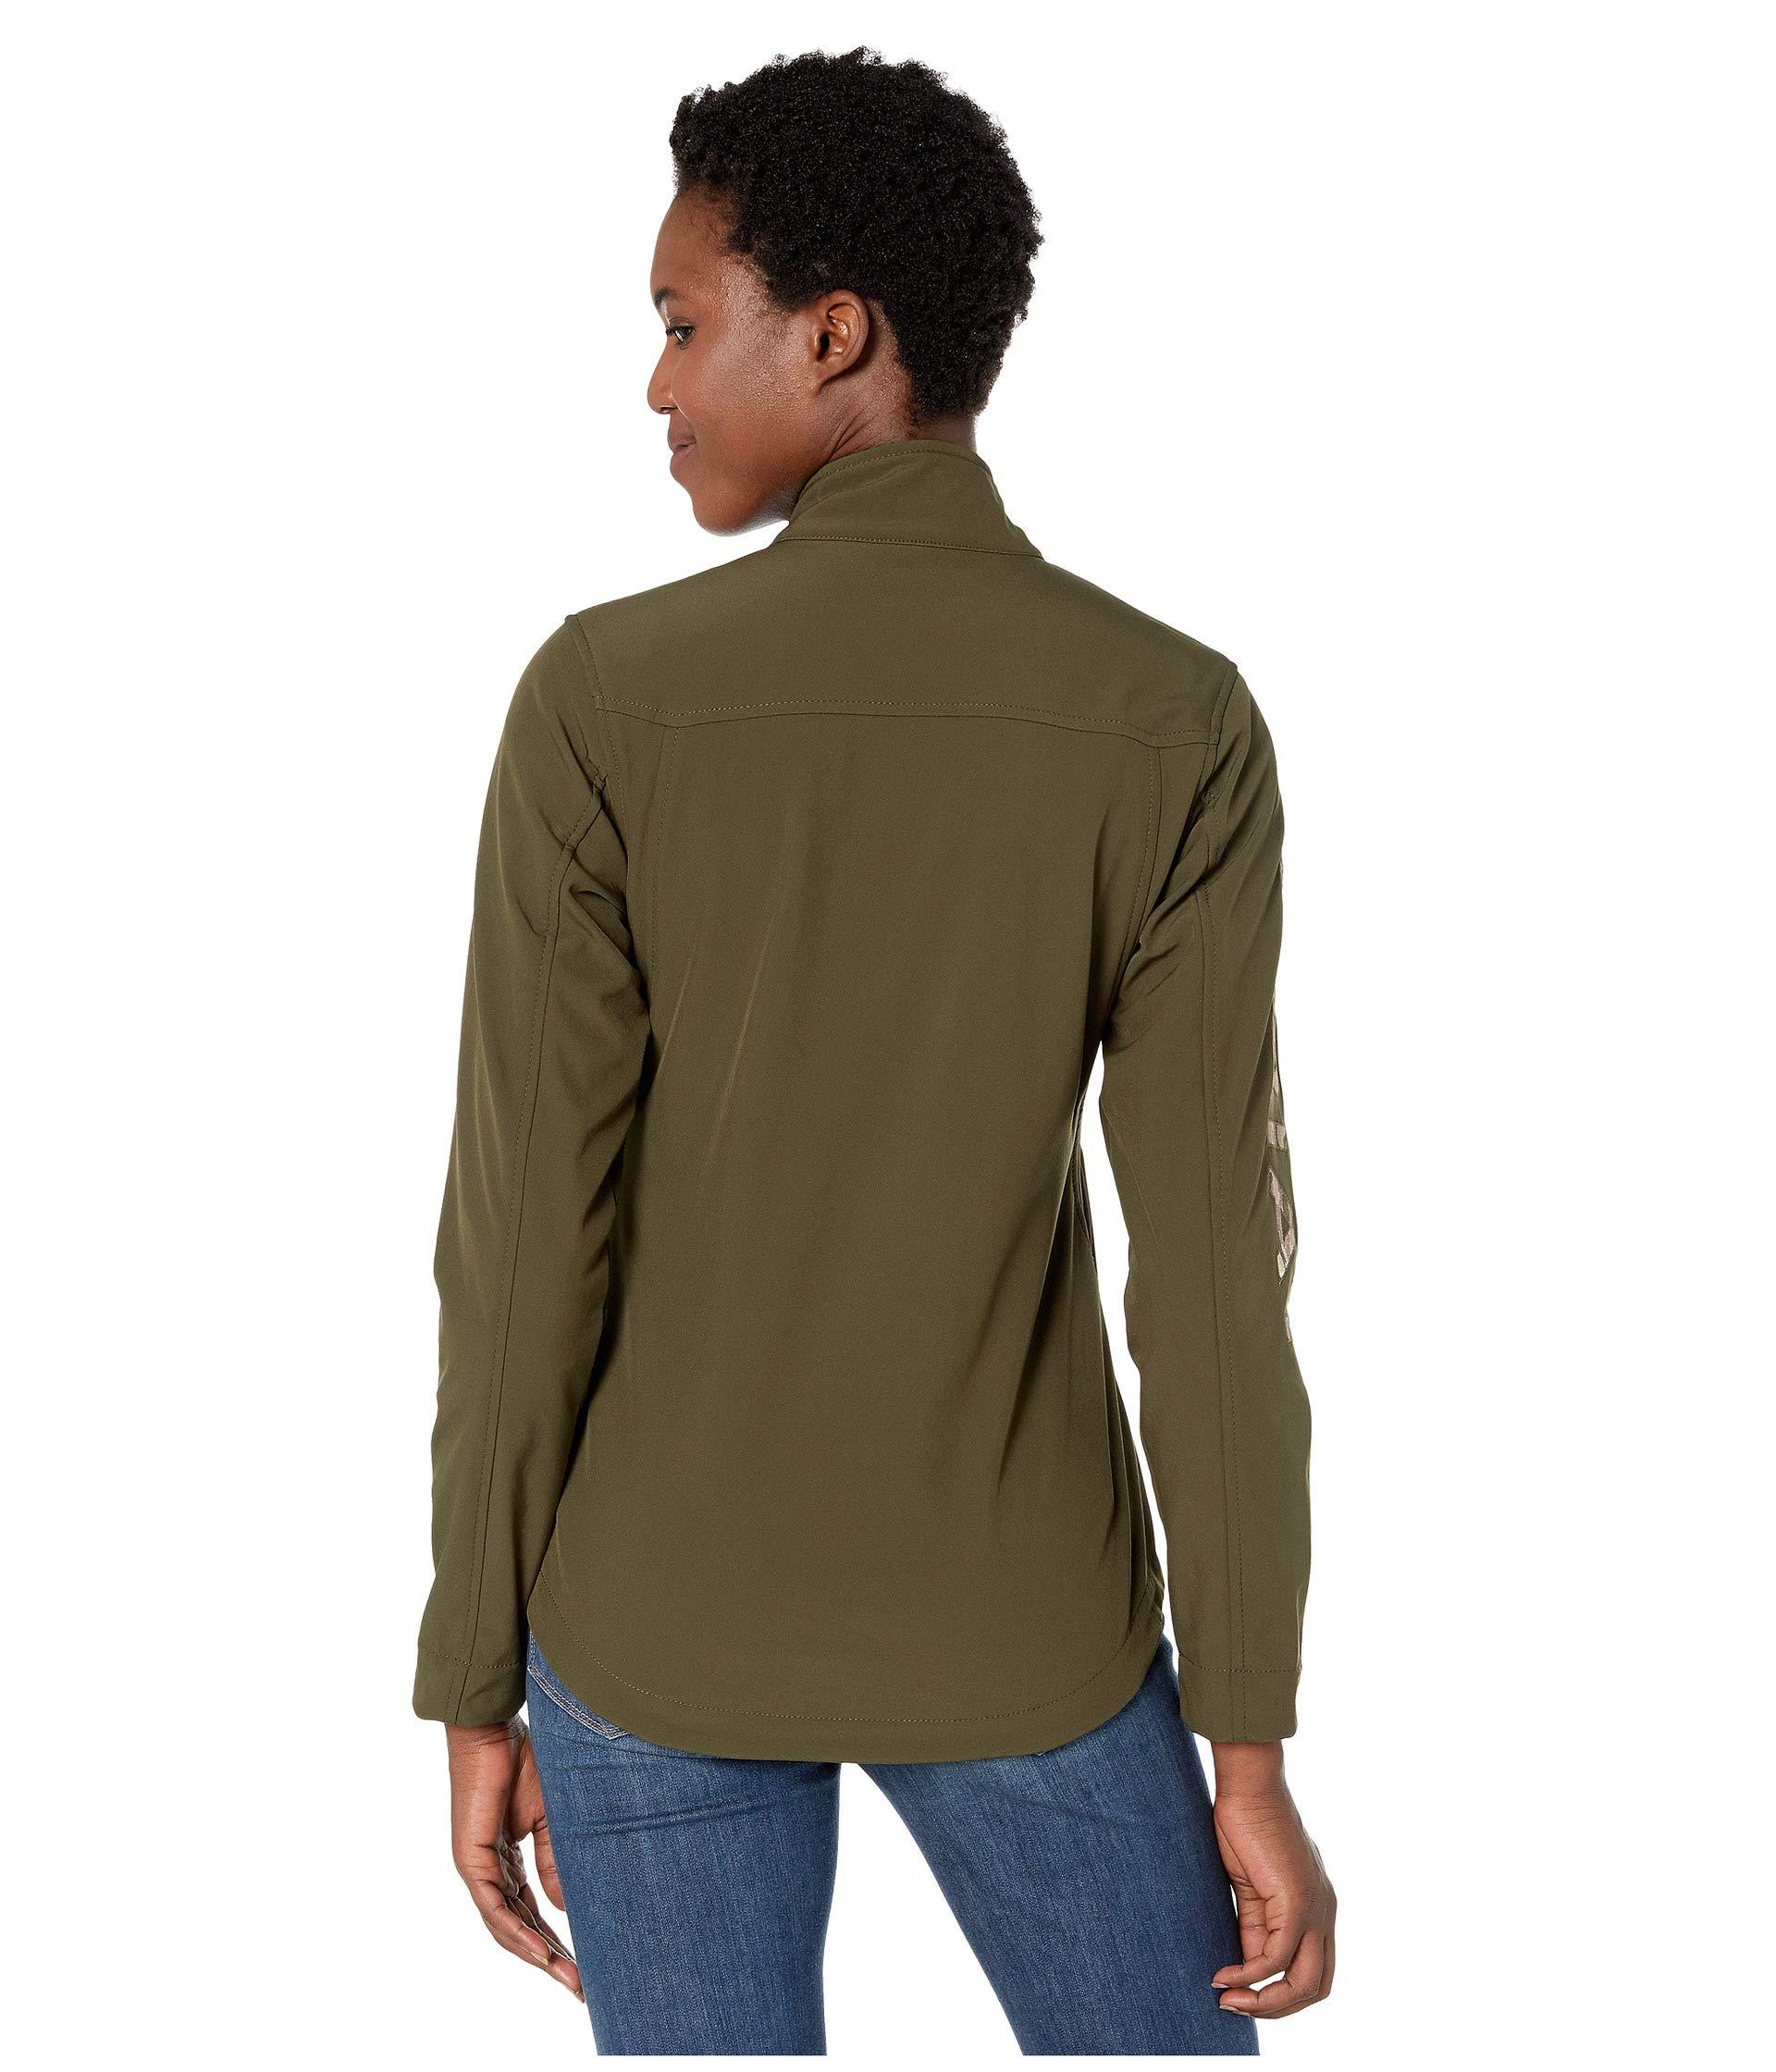 Ariat Synthetic New Team Softshell Jacket in Olive (Green) - Lyst